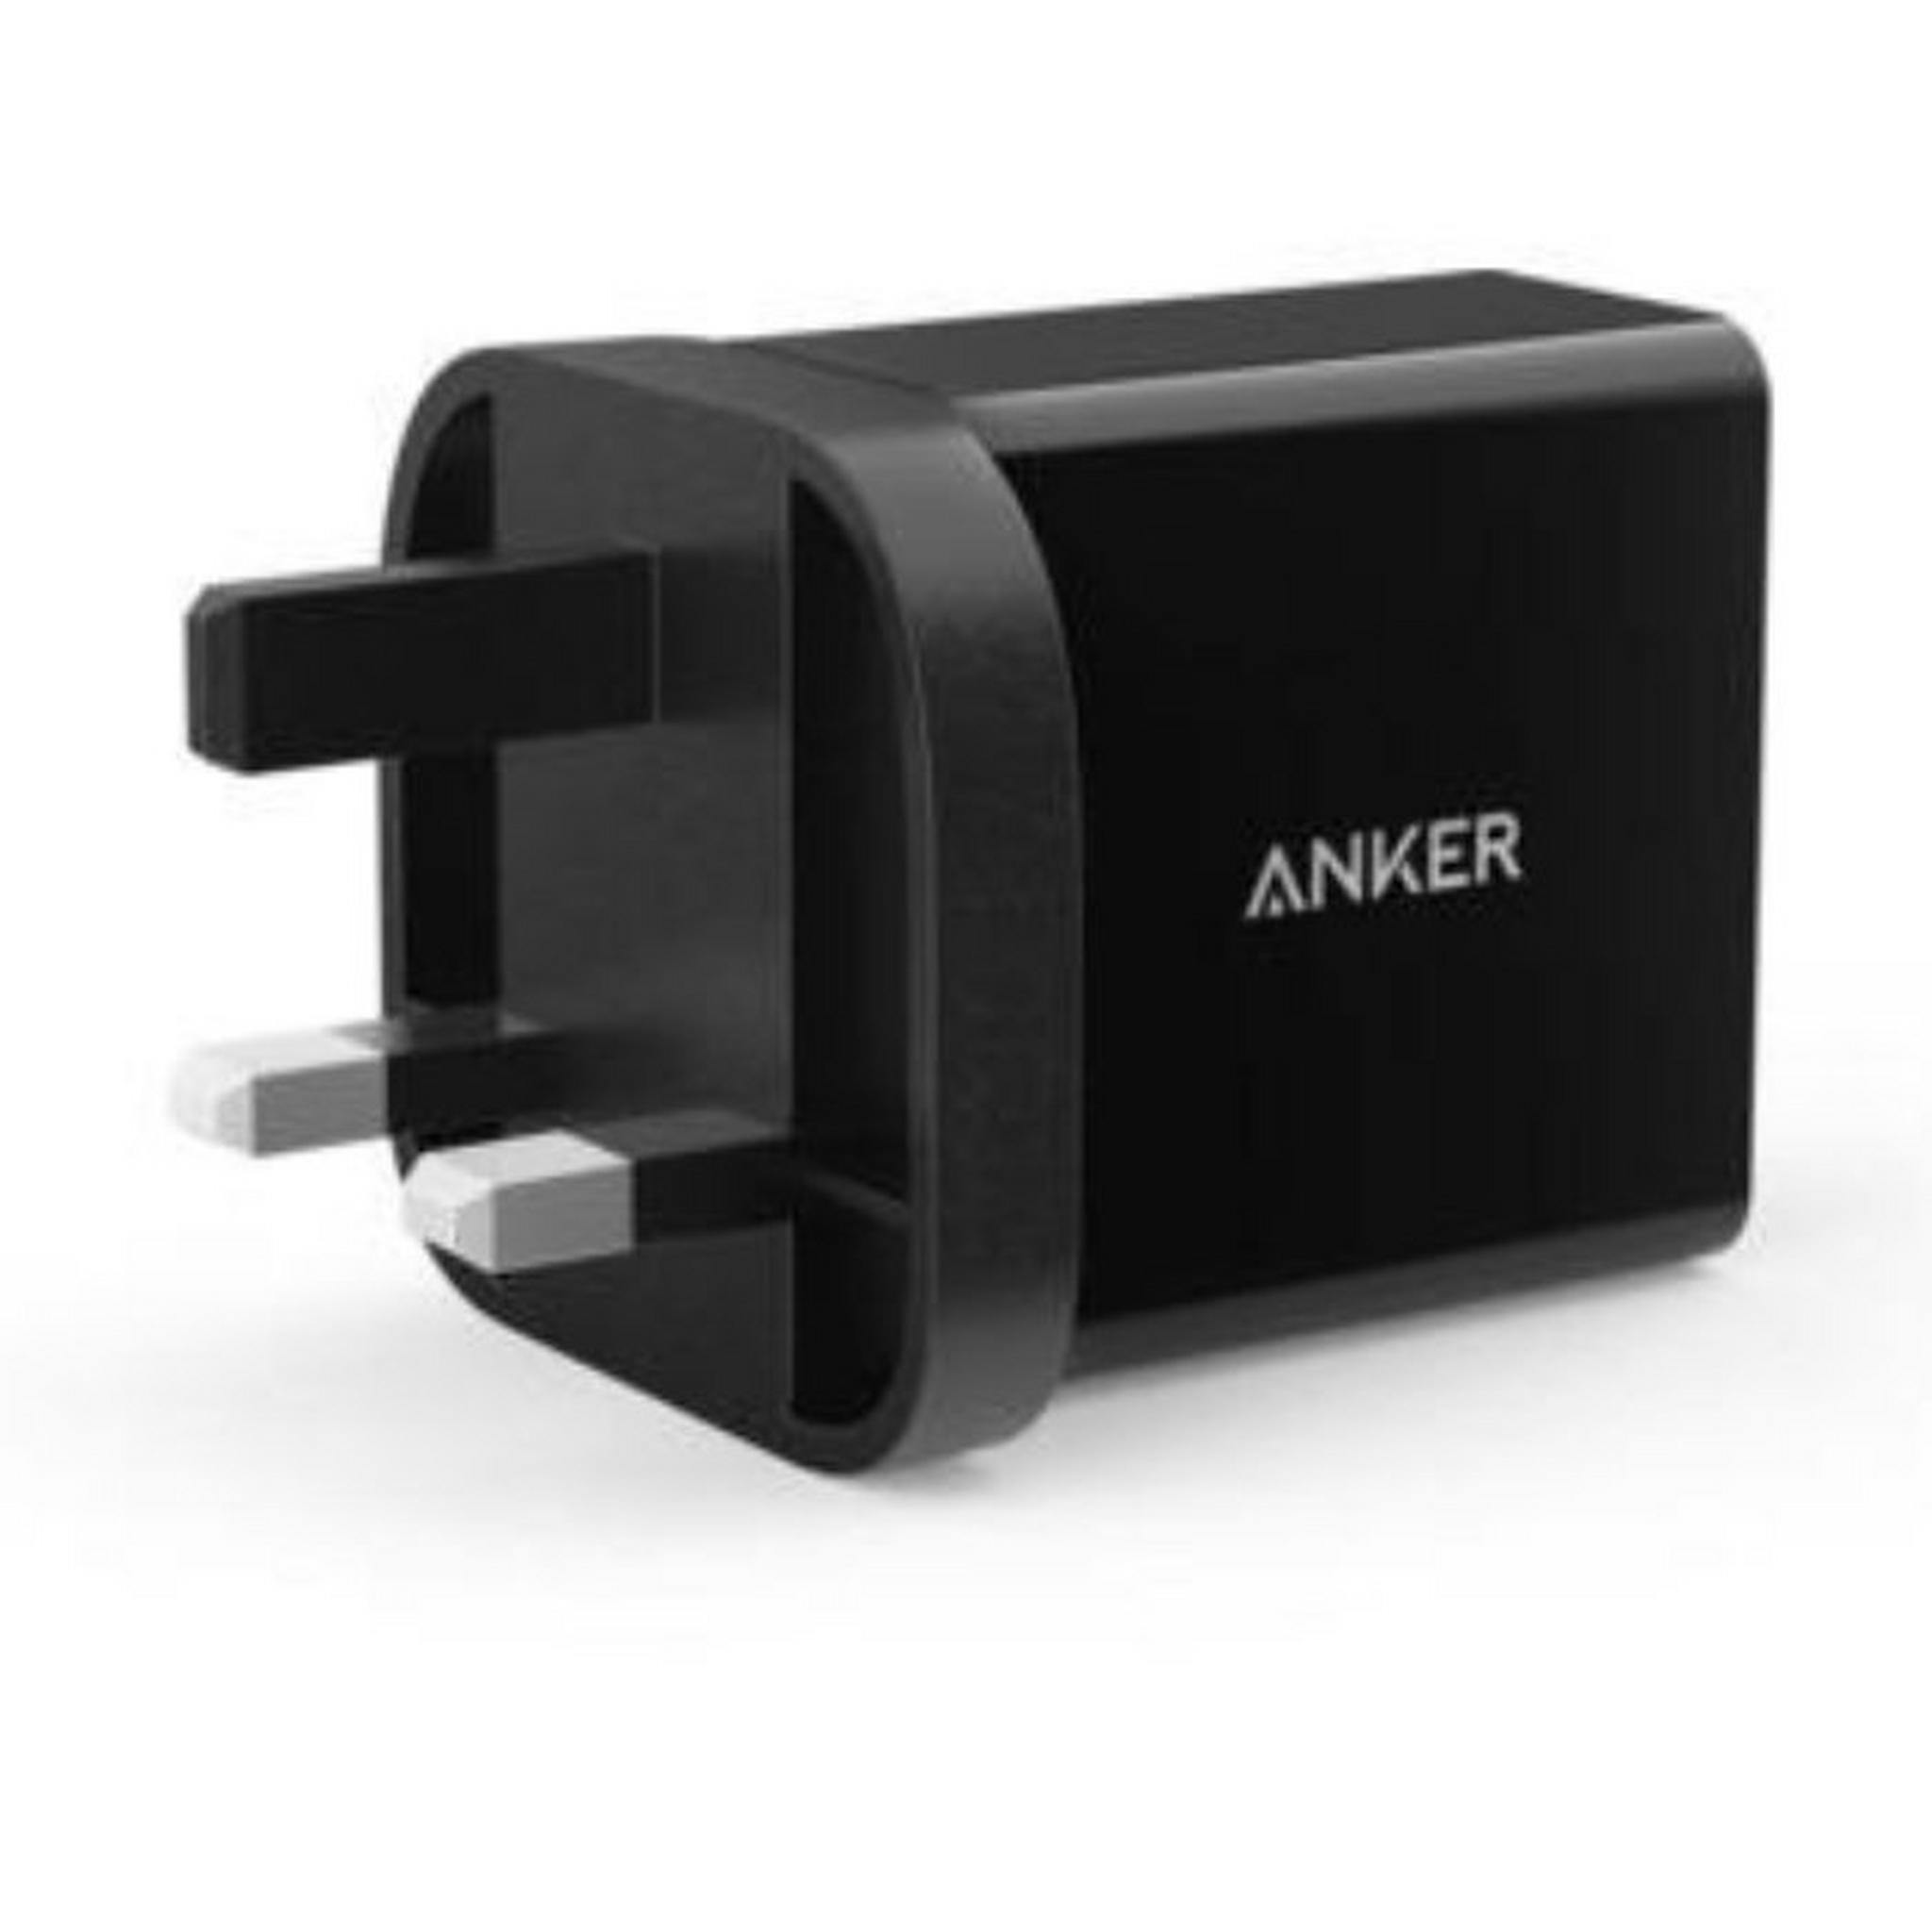 Anker PowerPort 2 Ports Wall Charger - Black